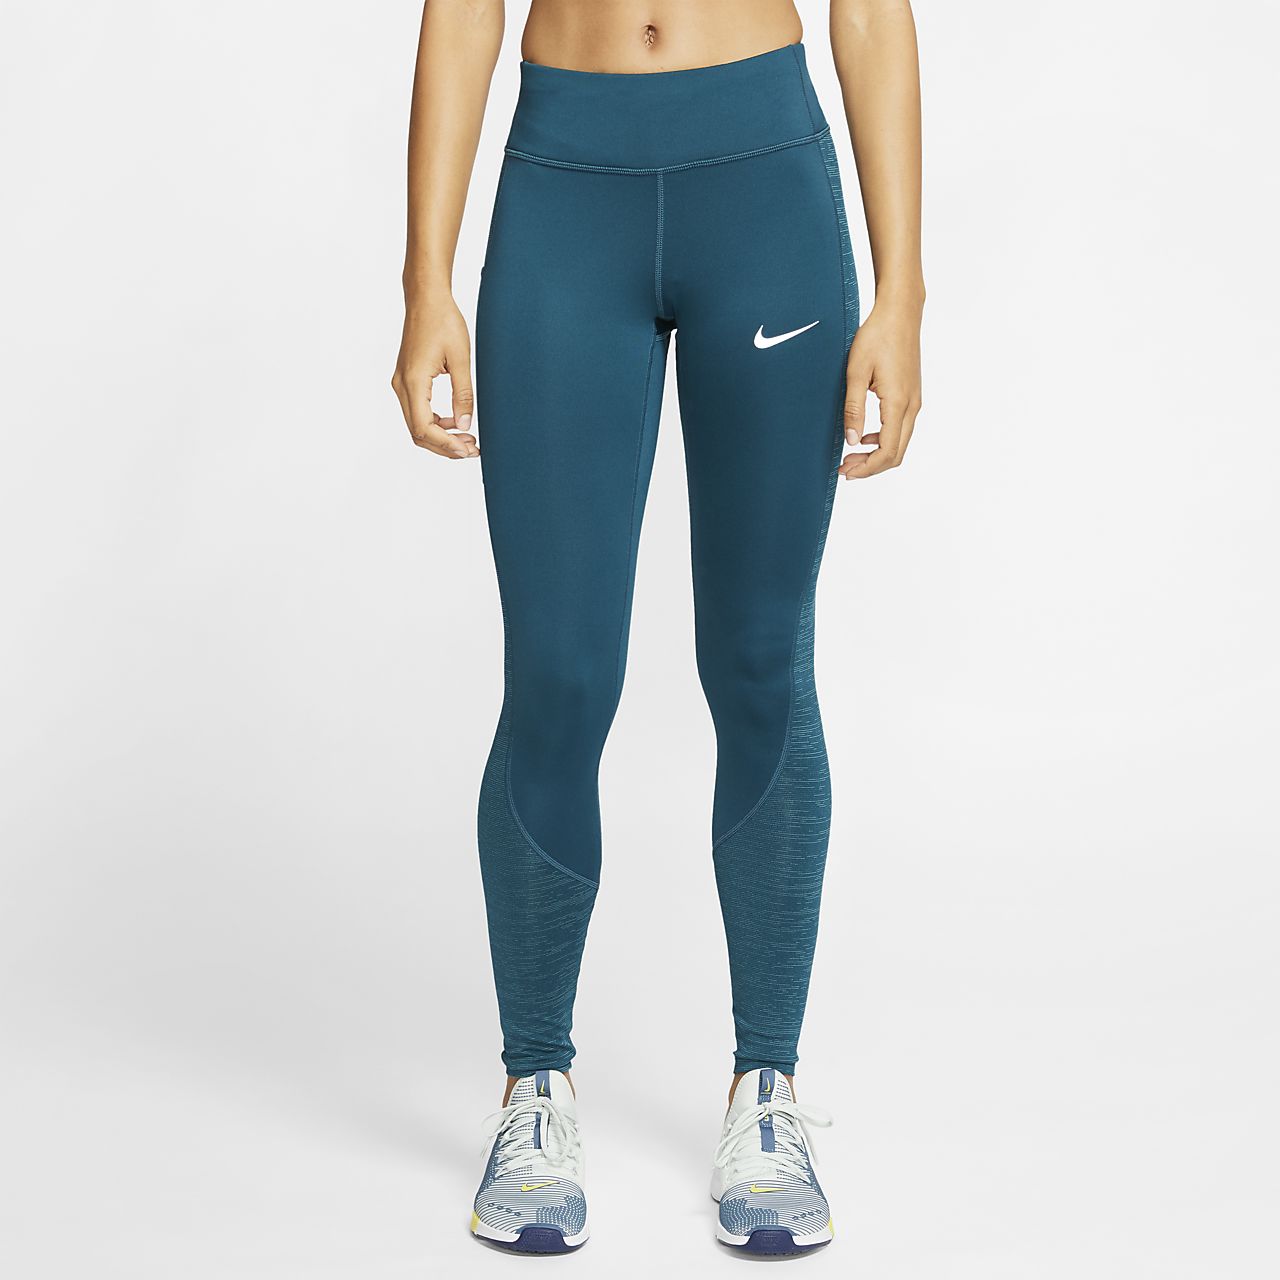 nike racer warm running tights \u003e Up to 